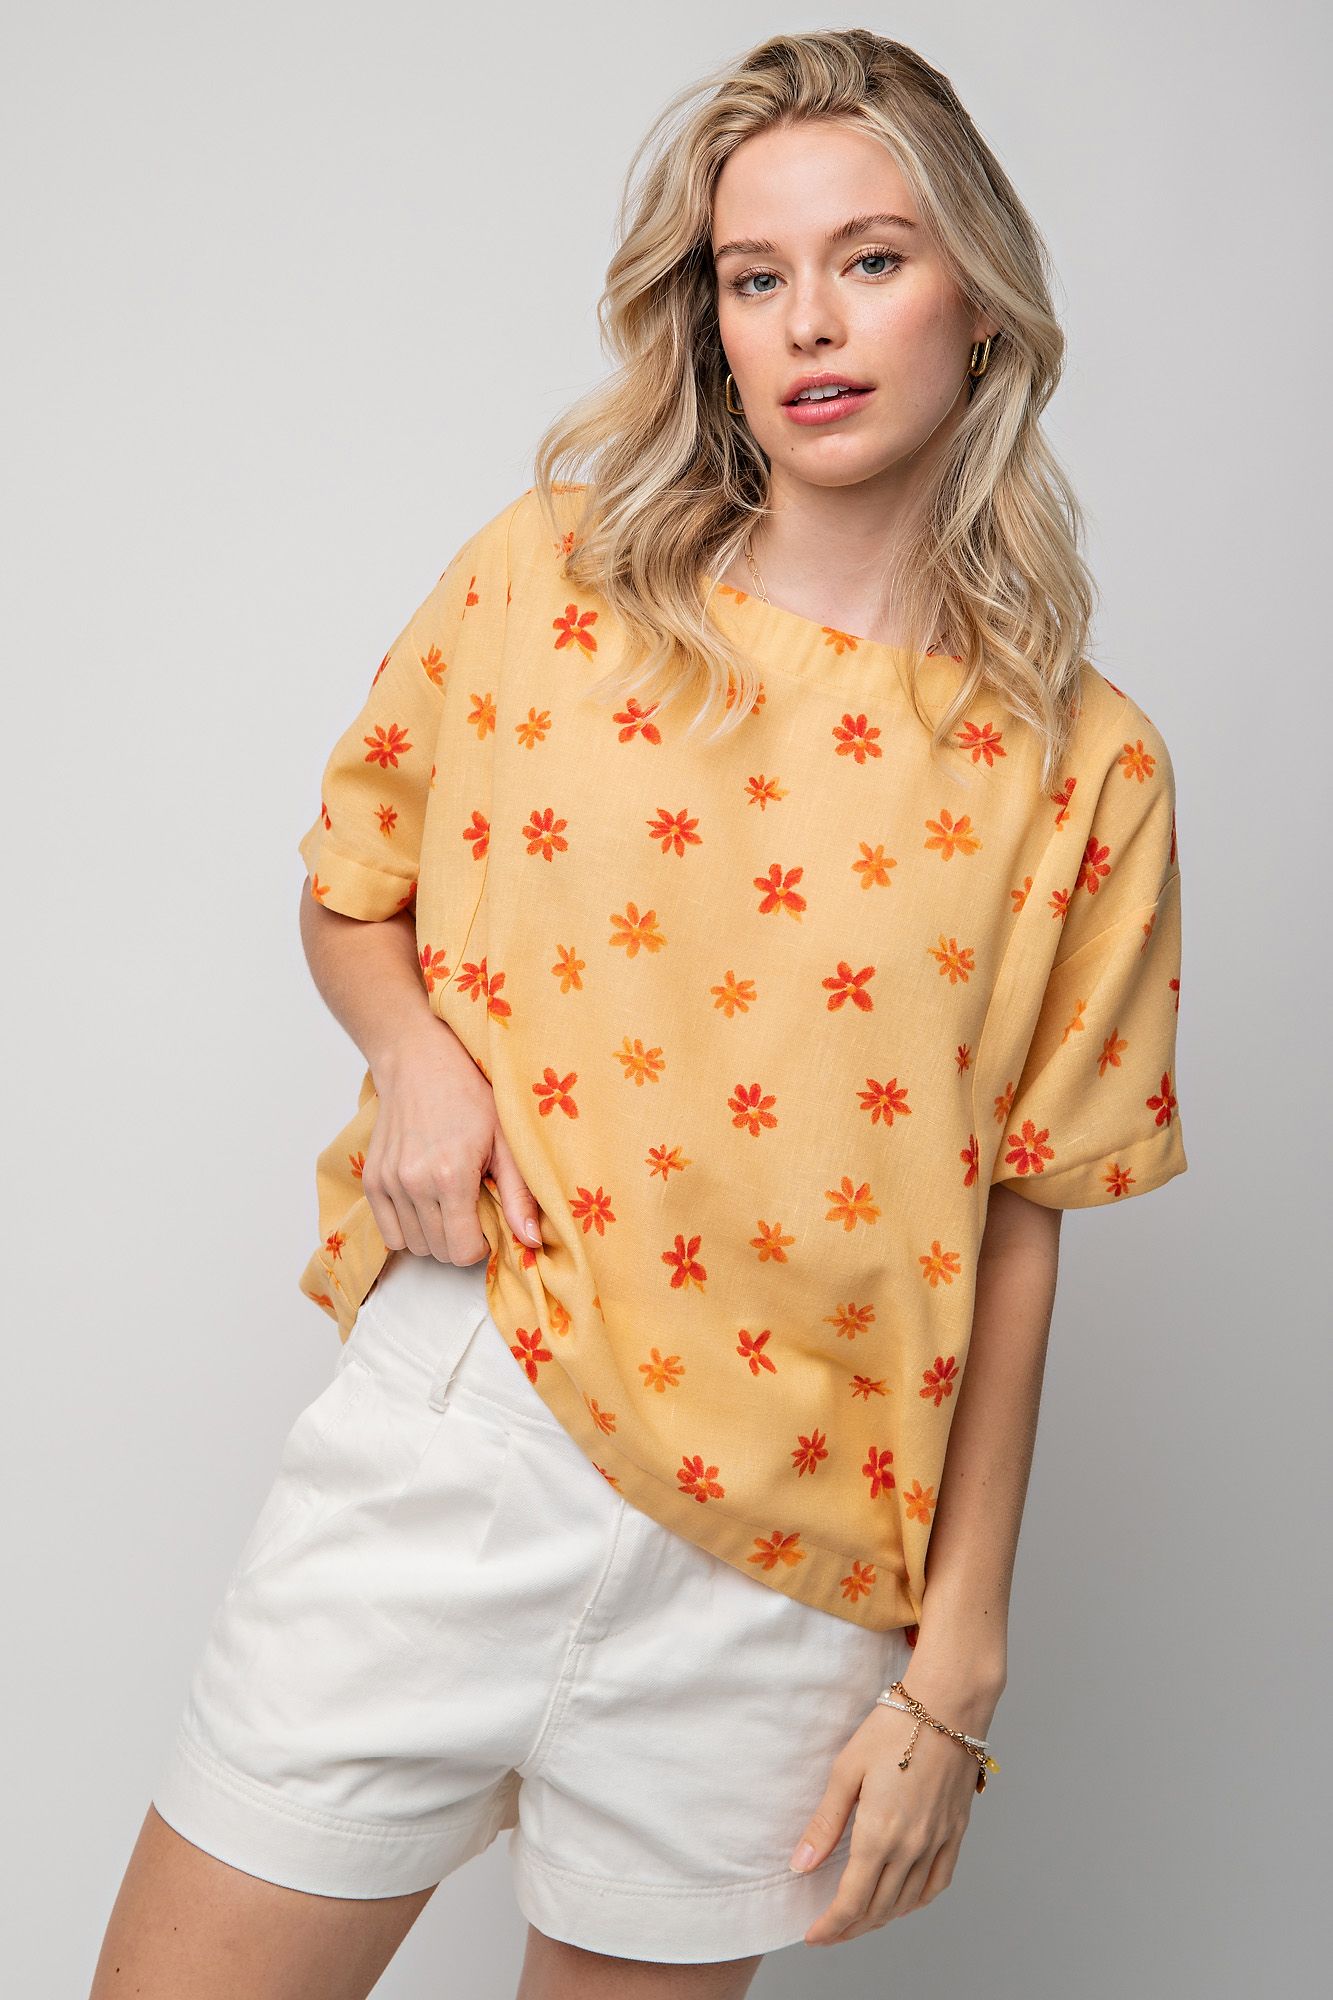 Easel Linen Floral Printed Boat Neck Half Sleeves Boxy Loose Fit Top